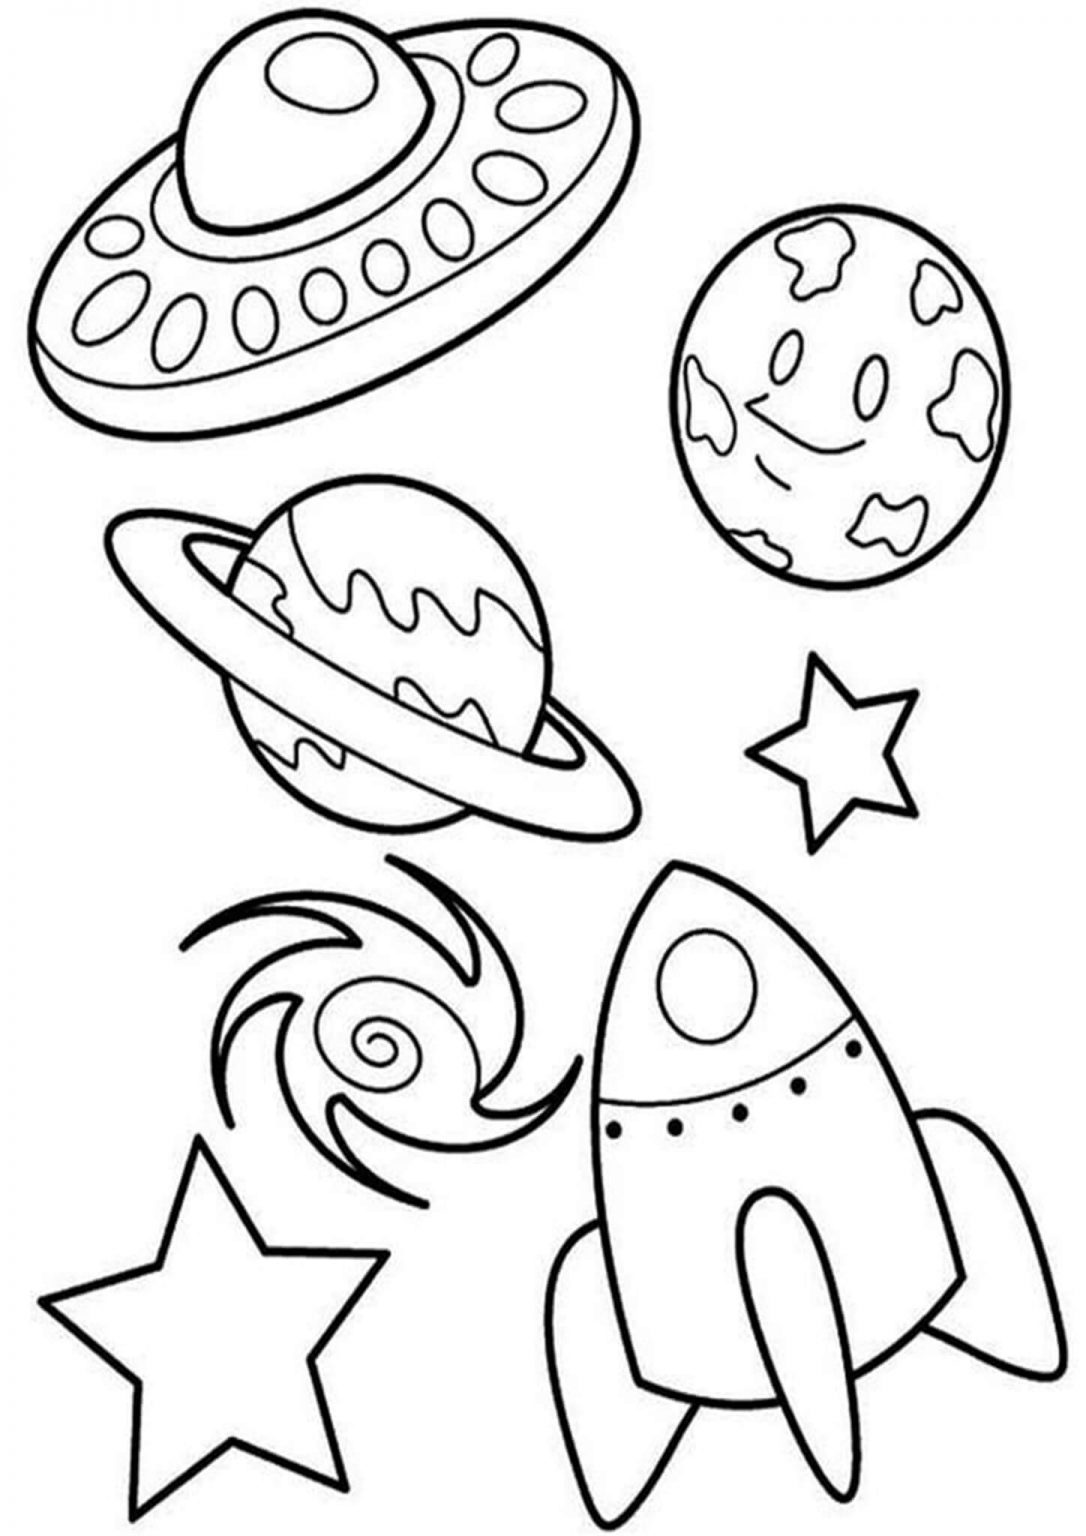 Simple Space Coloring Pages Coloring Pages